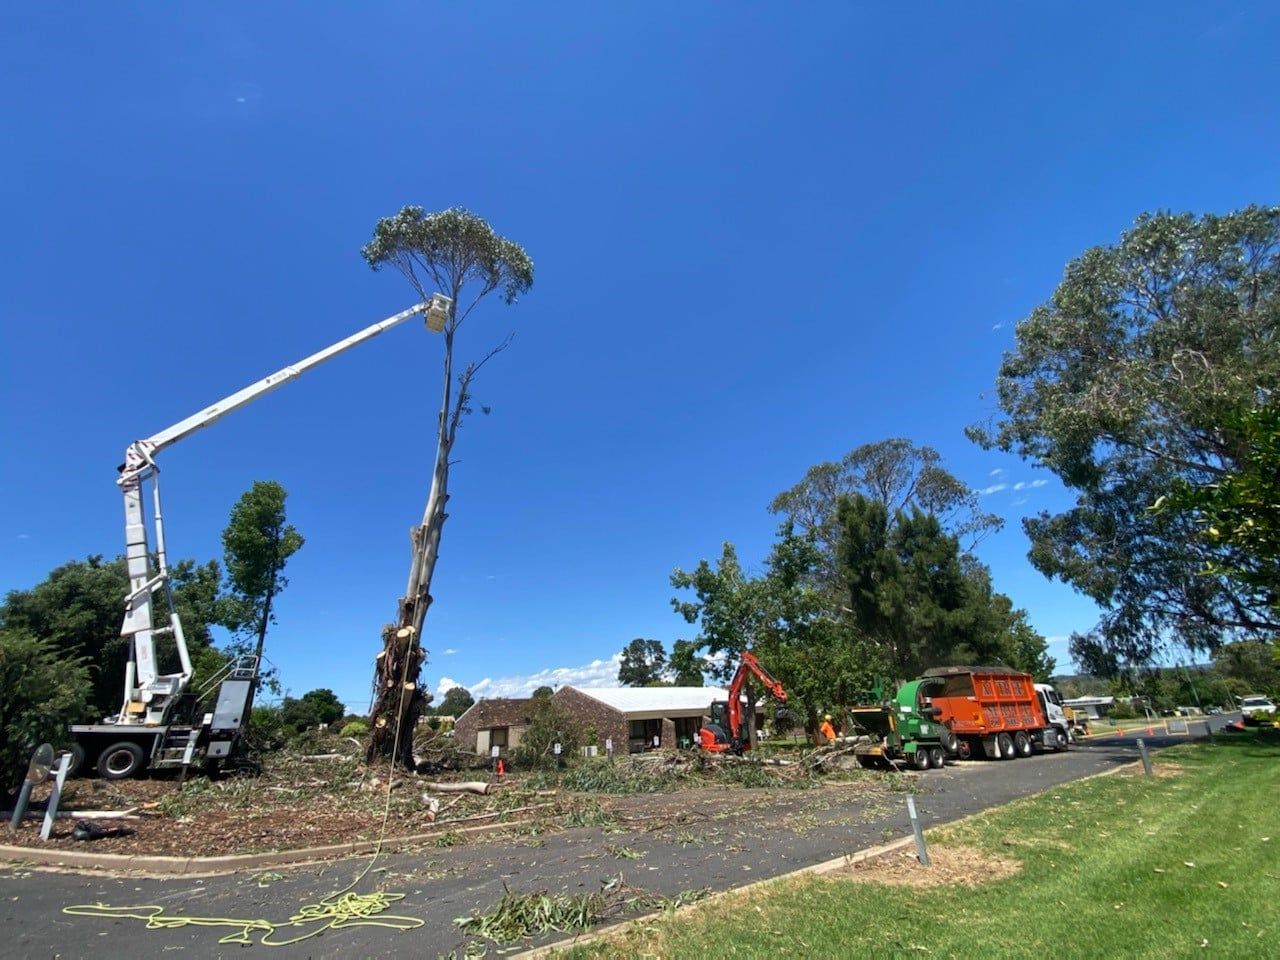 Heavy Machineries at Work — A1 Tree Services NSW in Dubbo, NSW